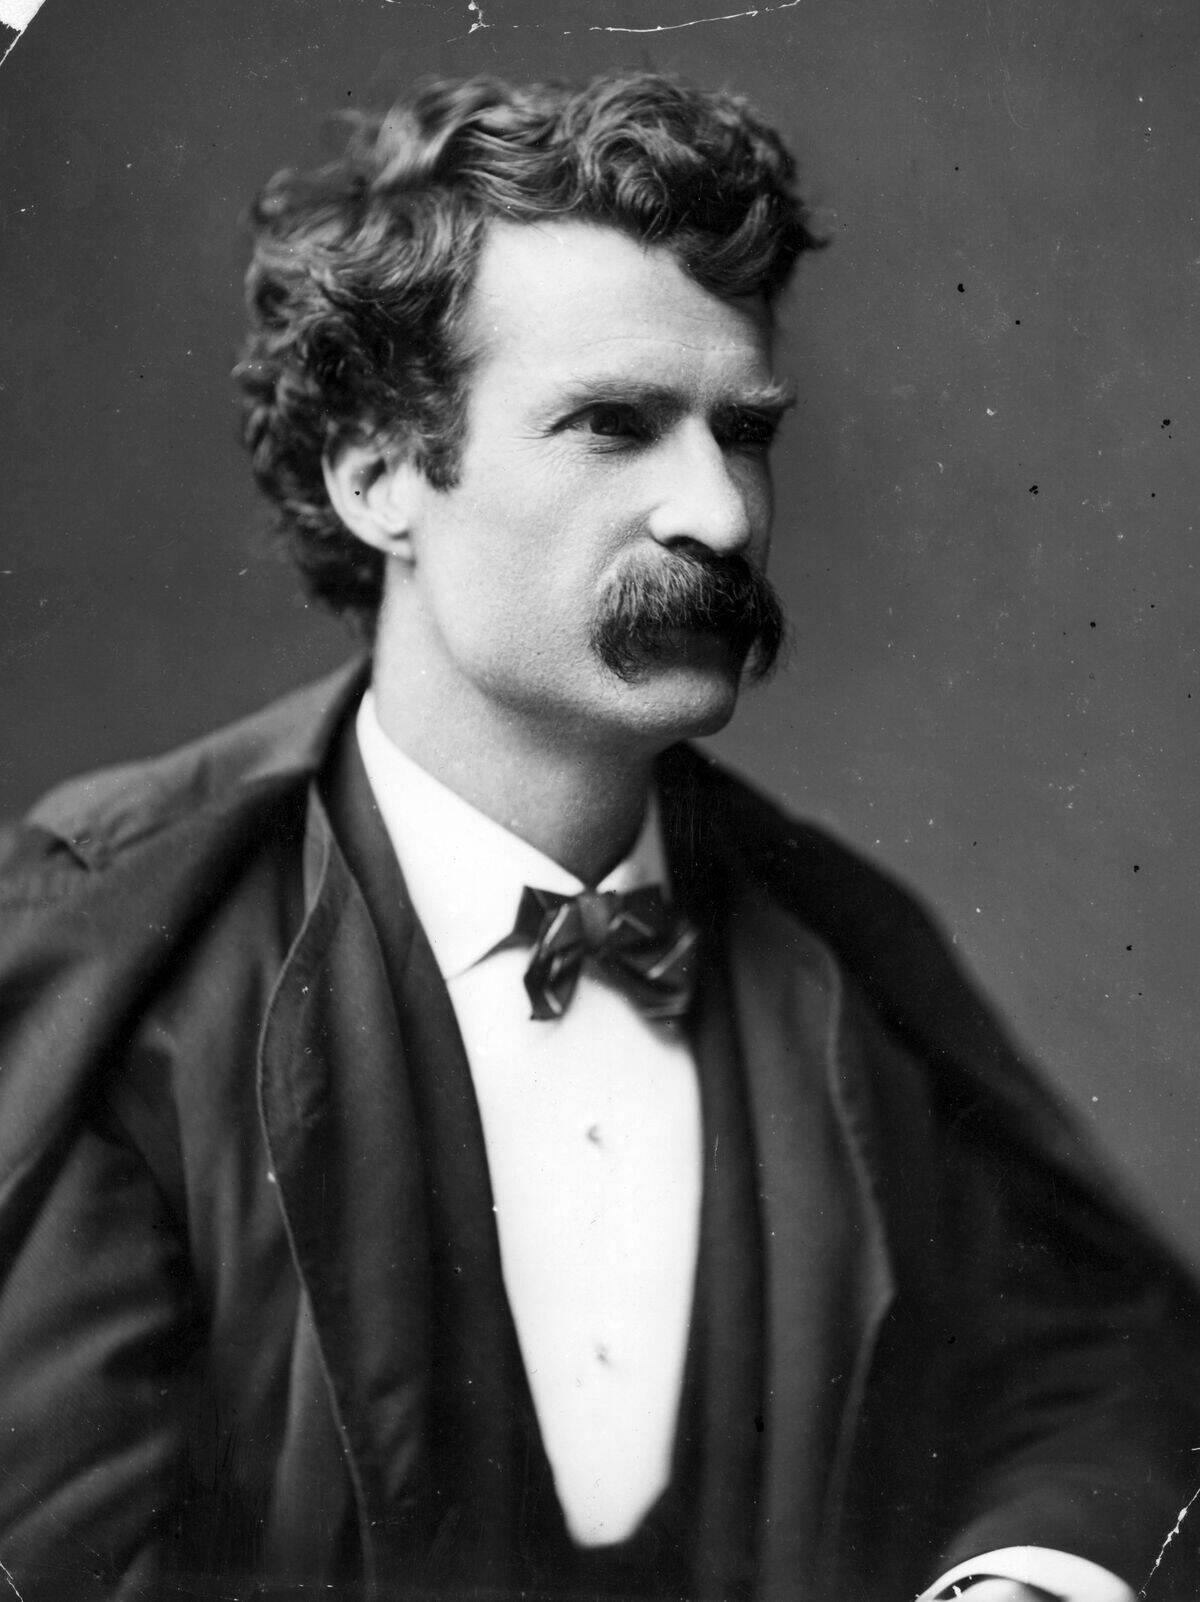 <p>In May 1864, Mark Twain challenged a rival newspaperman to a duel in Nevada. Before the fight took place, however, Twain fled. He headed to San Francisco, supposedly to avoid the territory's anti-dueling laws. </p> <p>After working a tedious job as a reporter for about a year, Twain posted bail for his friend who got arrested in a bar brawl. Twain didn't have the funds to cover the bond, so he skipped town with his friend and traveled to Tuolumne County. There, he published his first hit story.</p>